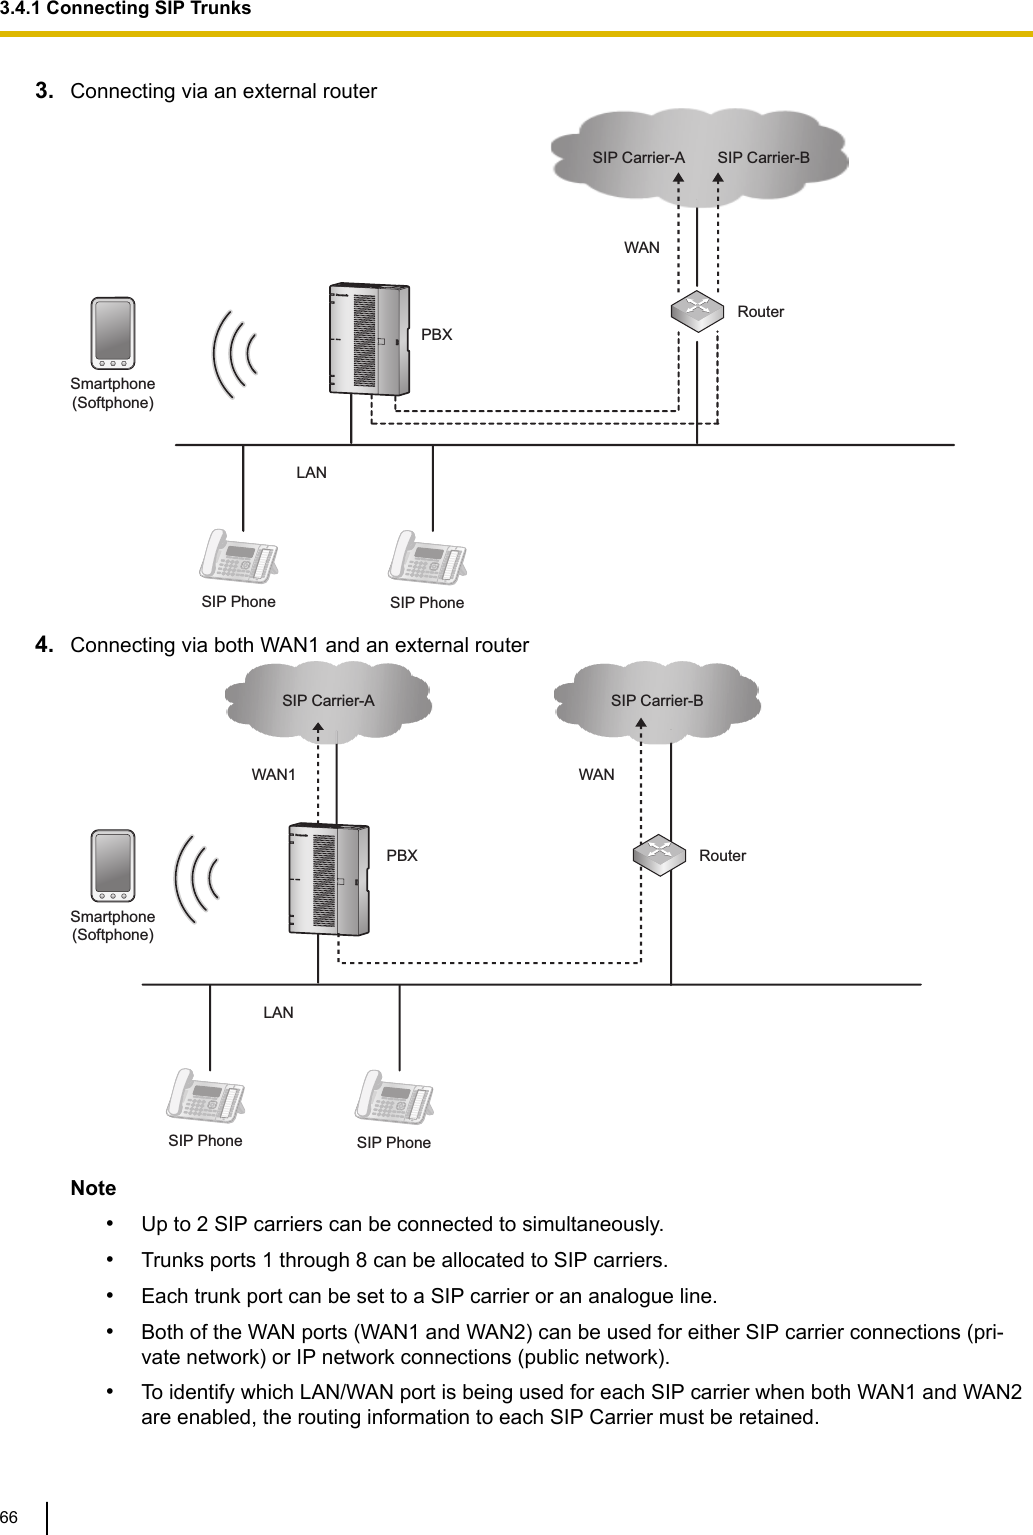 3. Connecting via an external routerSIP Phone SIP PhonePBXSmartphone(Softphone)LANSIP Carrier-A SIP Carrier-BRouterWAN4. Connecting via both WAN1 and an external routerPBX RouterSIP Carrier-A SIP Carrier-BWAN1 WANSmartphone(Softphone)SIP Phone SIP PhoneLANNote•Up to 2 SIP carriers can be connected to simultaneously.•Trunks ports 1 through 8 can be allocated to SIP carriers.•Each trunk port can be set to a SIP carrier or an analogue line.•Both of the WAN ports (WAN1 and WAN2) can be used for either SIP carrier connections (pri-vate network) or IP network connections (public network).•To identify which LAN/WAN port is being used for each SIP carrier when both WAN1 and WAN2are enabled, the routing information to each SIP Carrier must be retained.3.4.1 Connecting SIP Trunks66